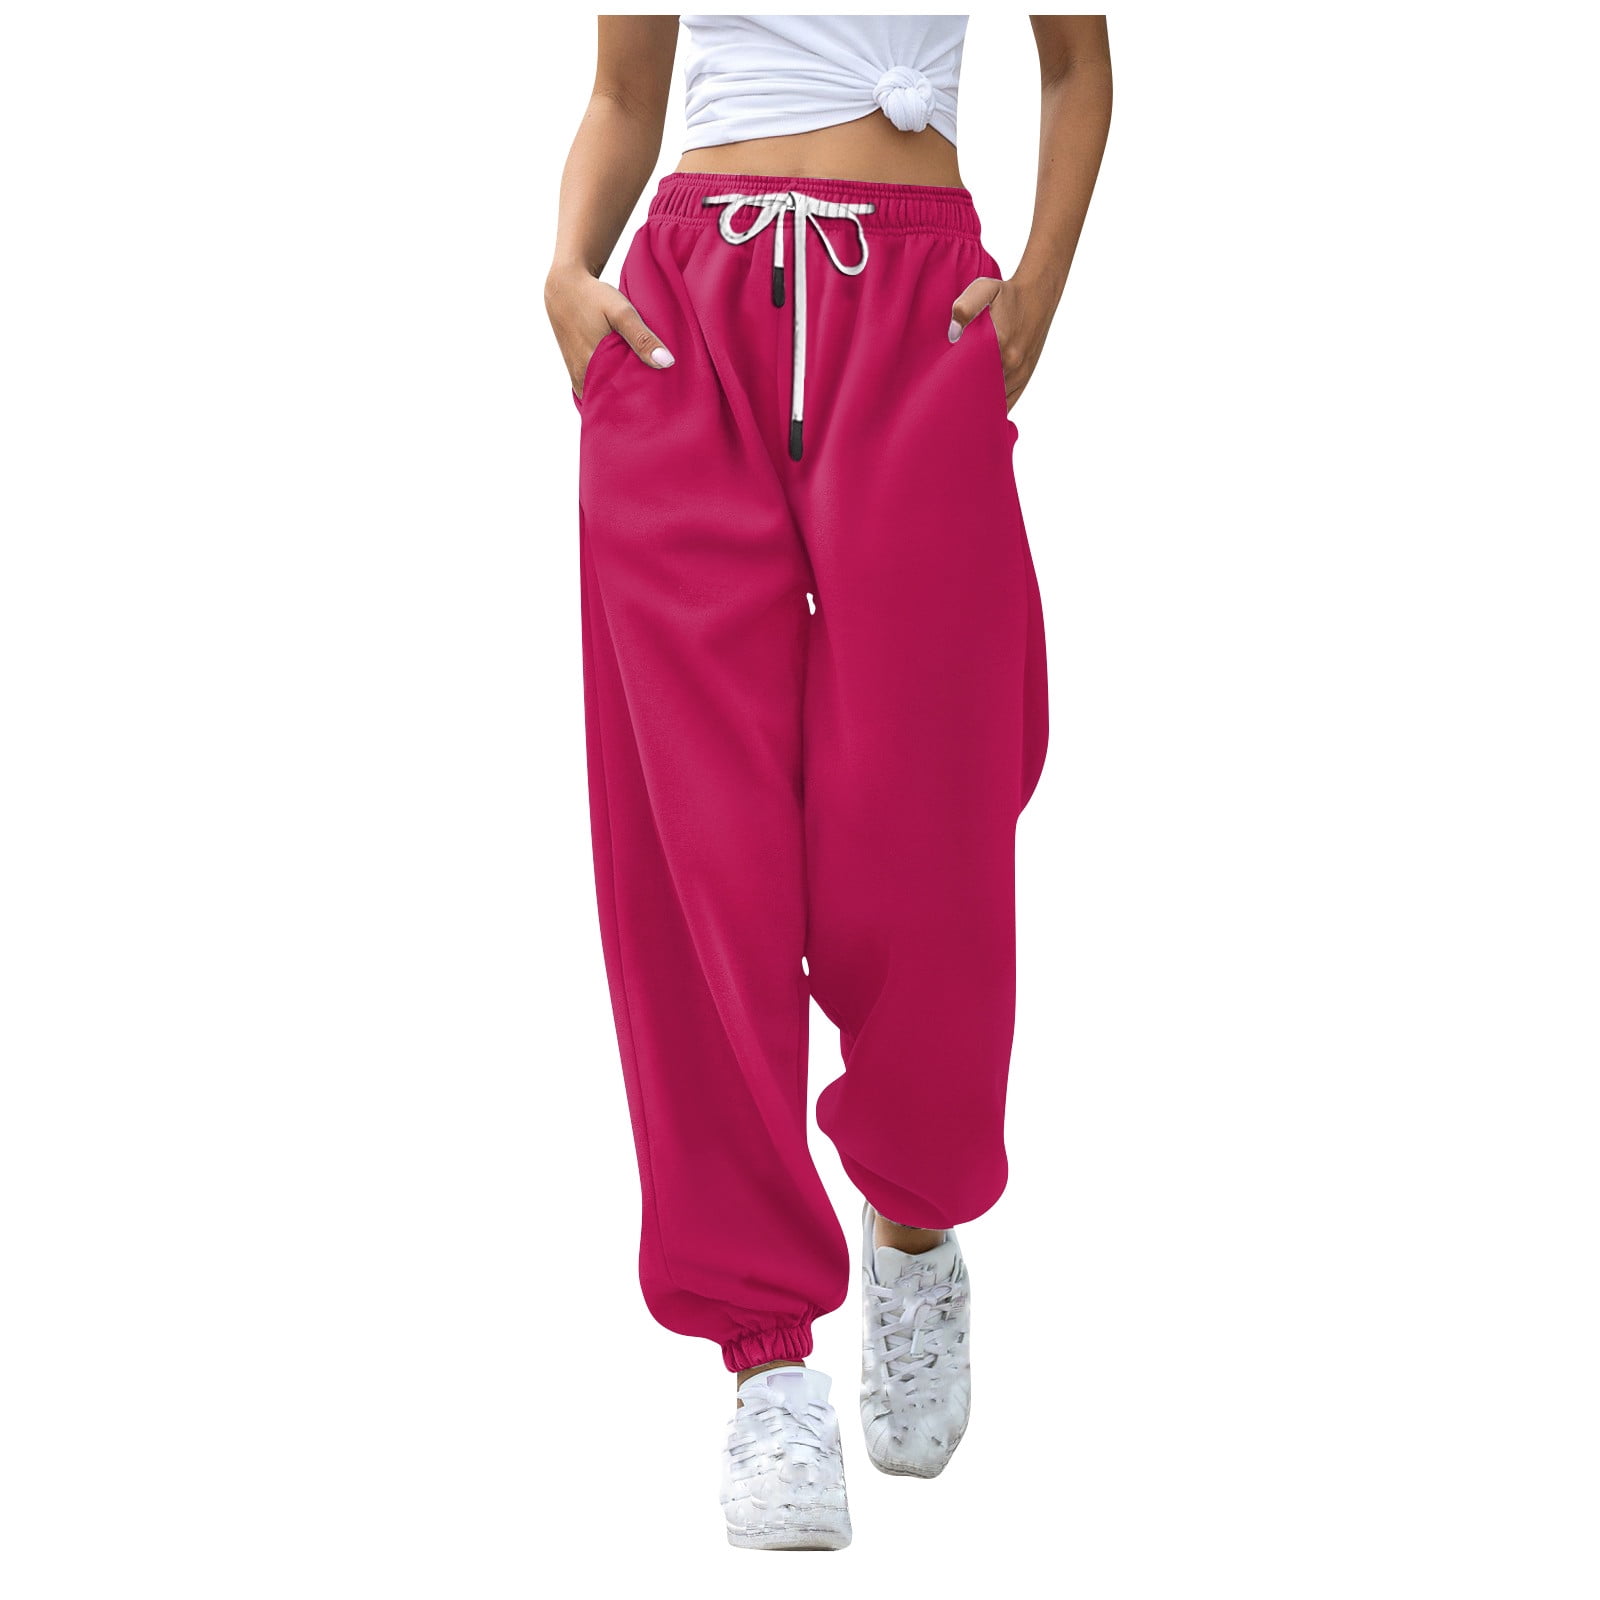 DENGDENG Womens Sweatpants for Teen Girls Solid Color High Waisted